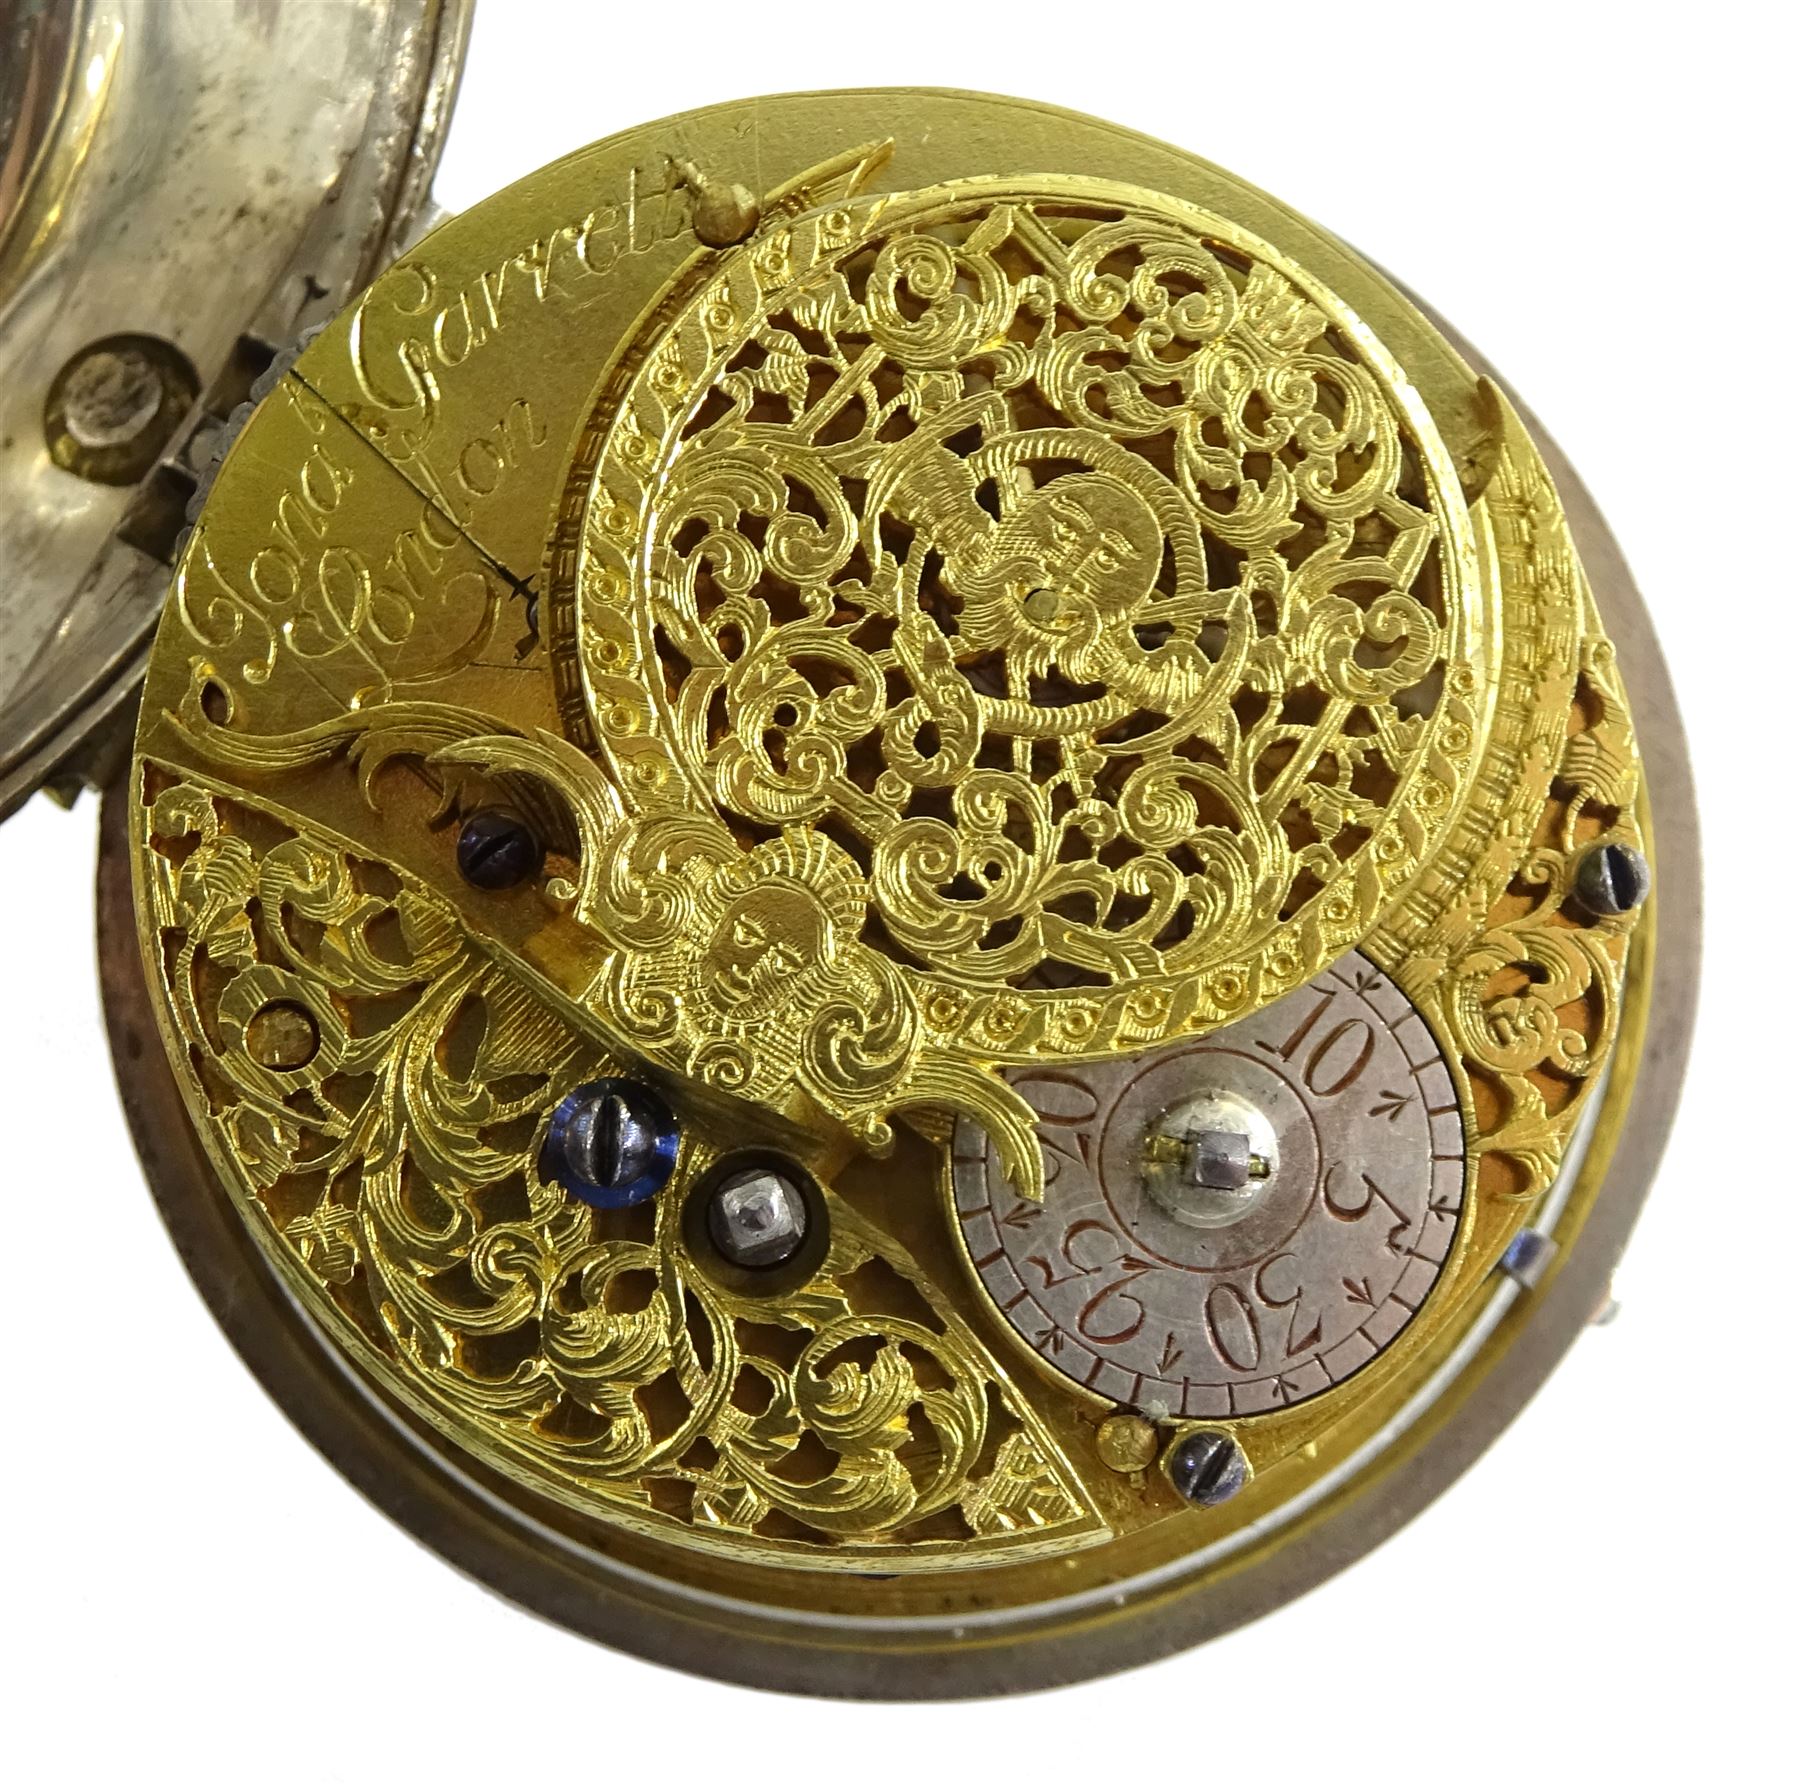 Late 17th/ early 18th century silver pair cased verge fusee pocket watch by Jonathan Garrett - Image 2 of 7